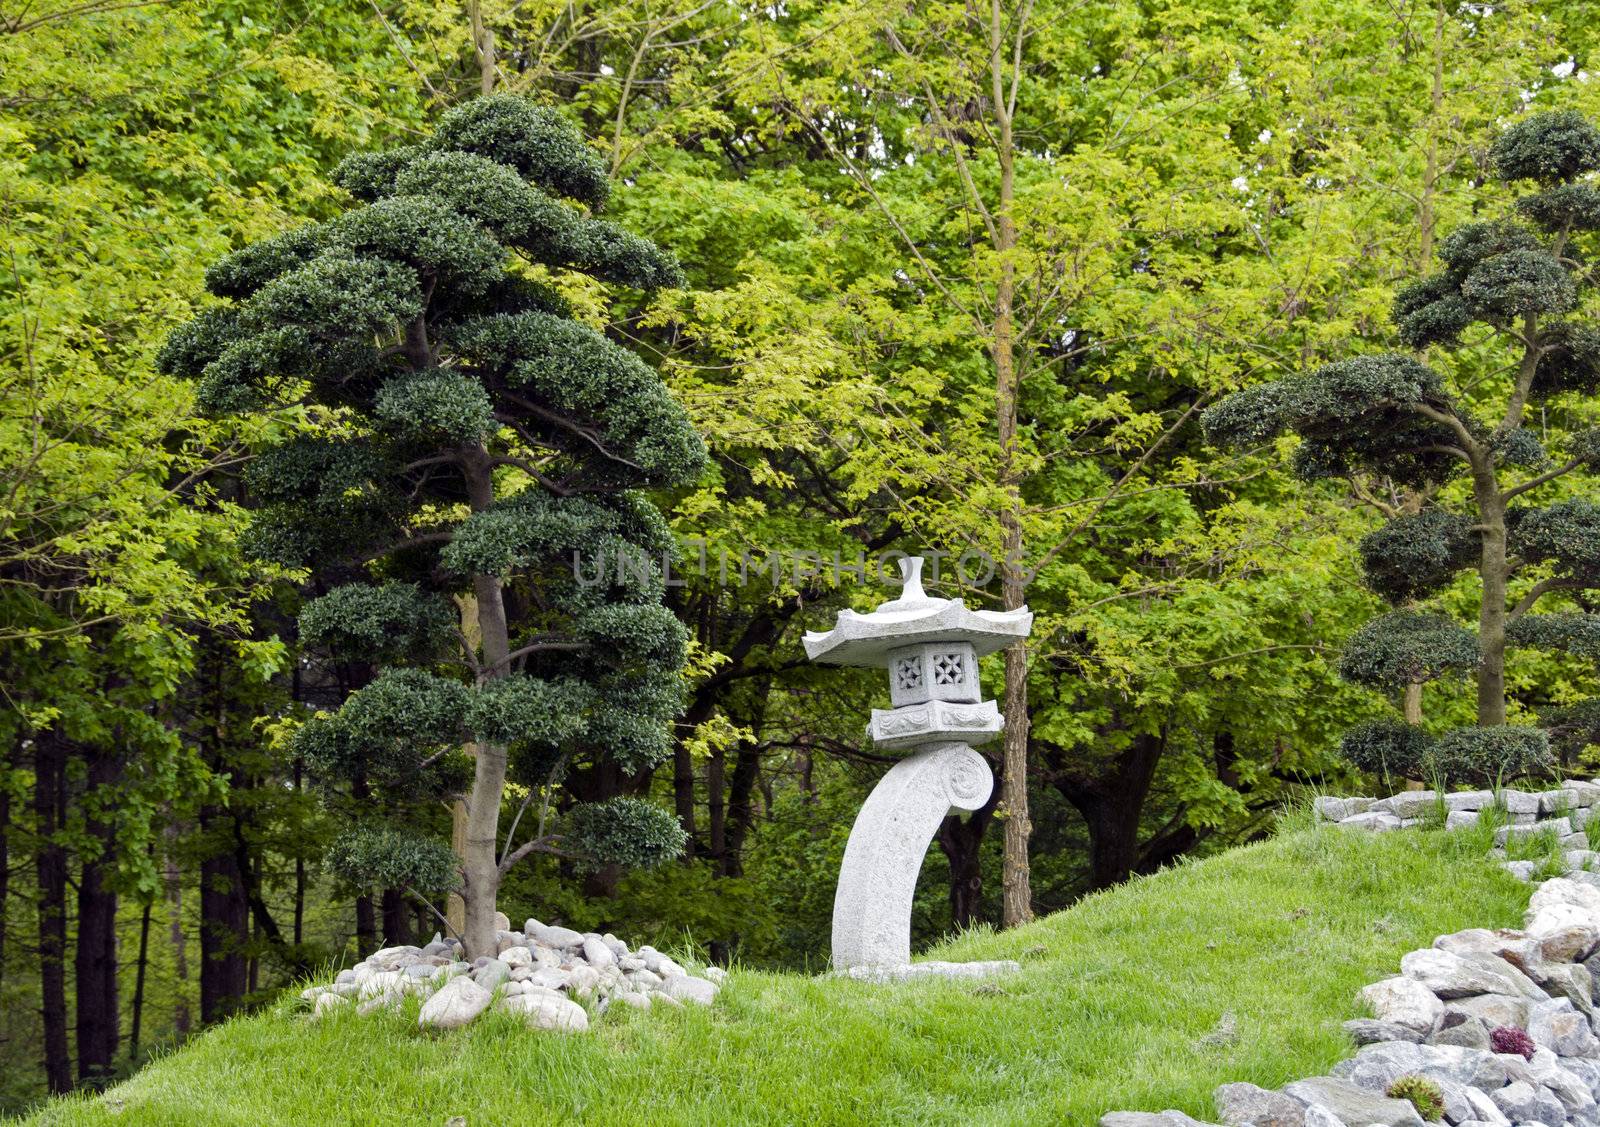 bonsai trees and concrete structure in japanese garden